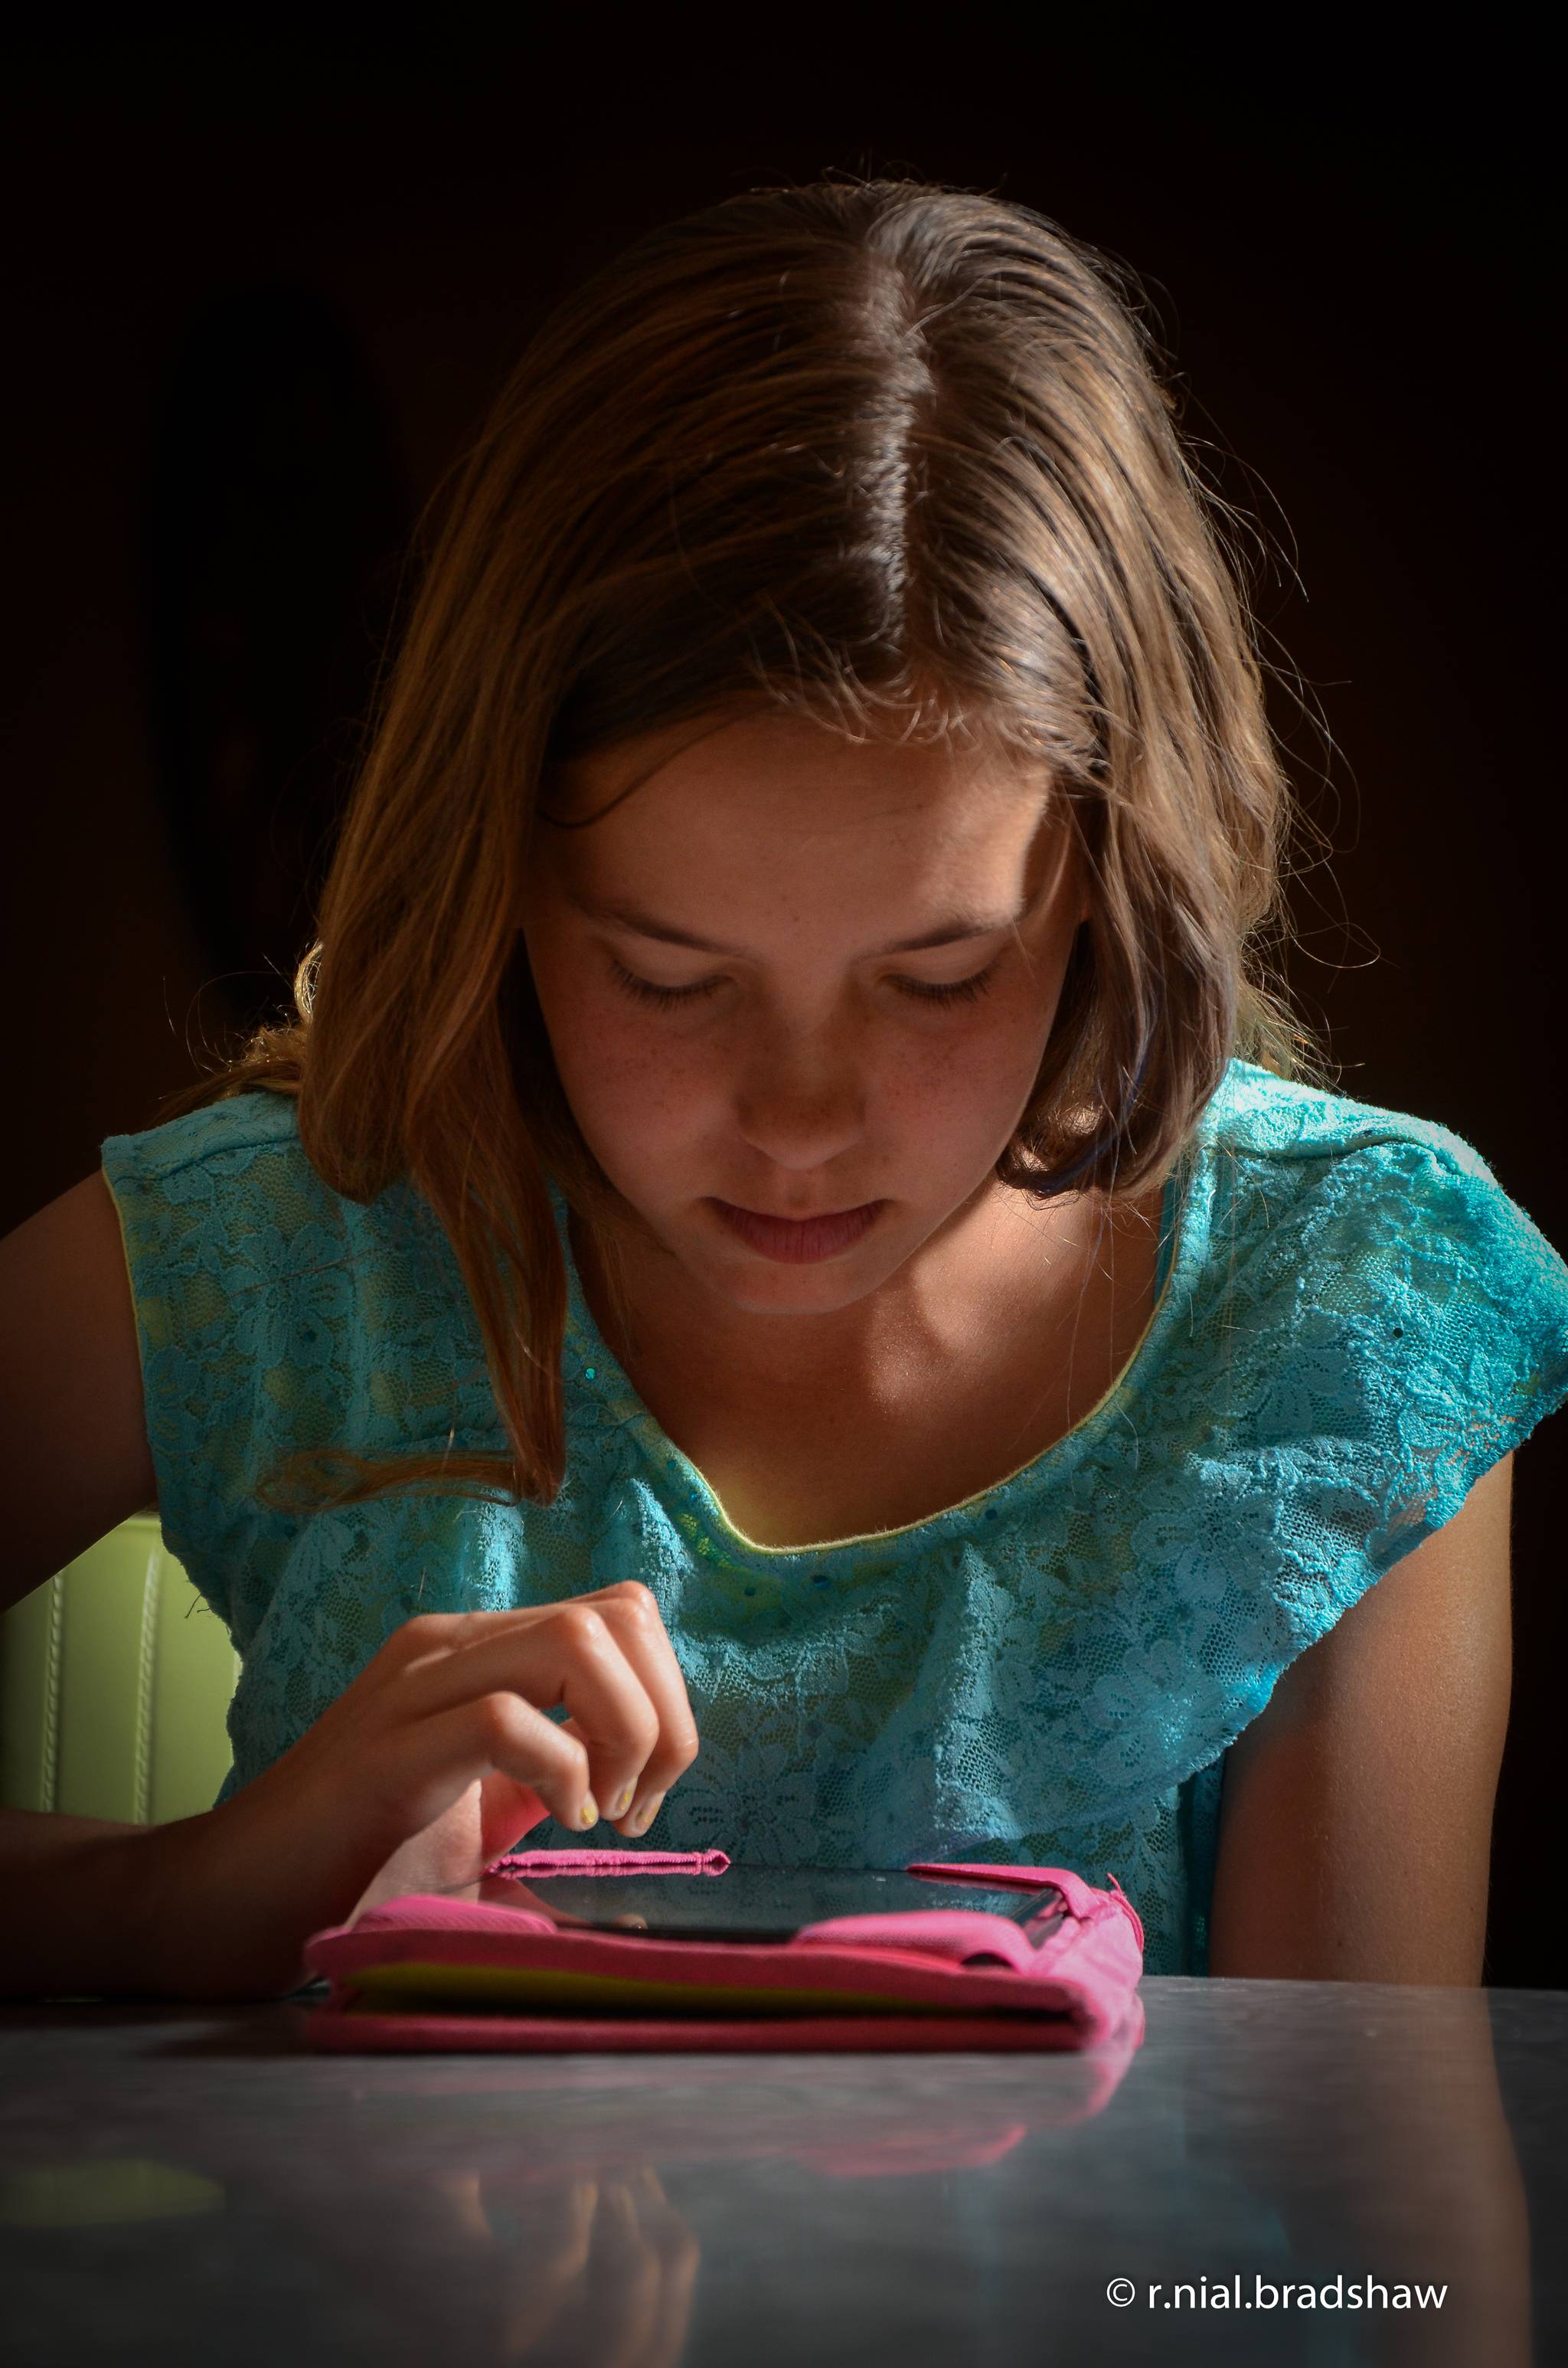 Apps are helping kids learn when to save and spend